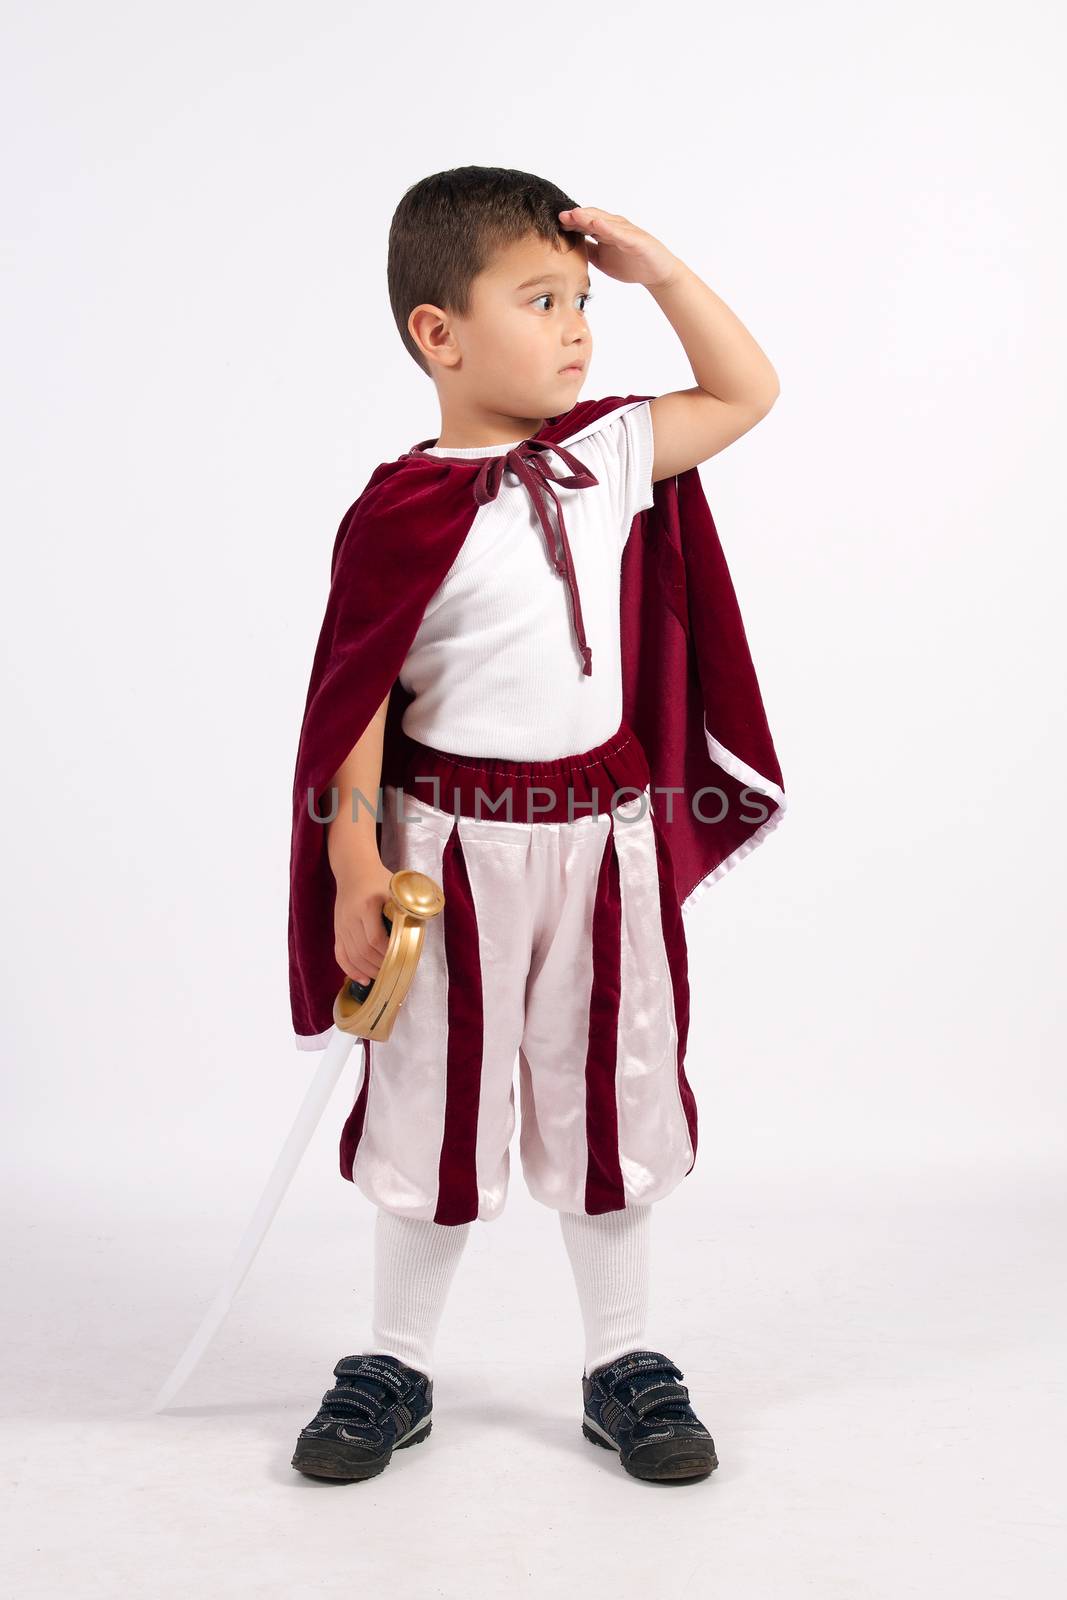 Boy dressed in an oblique Prince, holding in his hand a sword